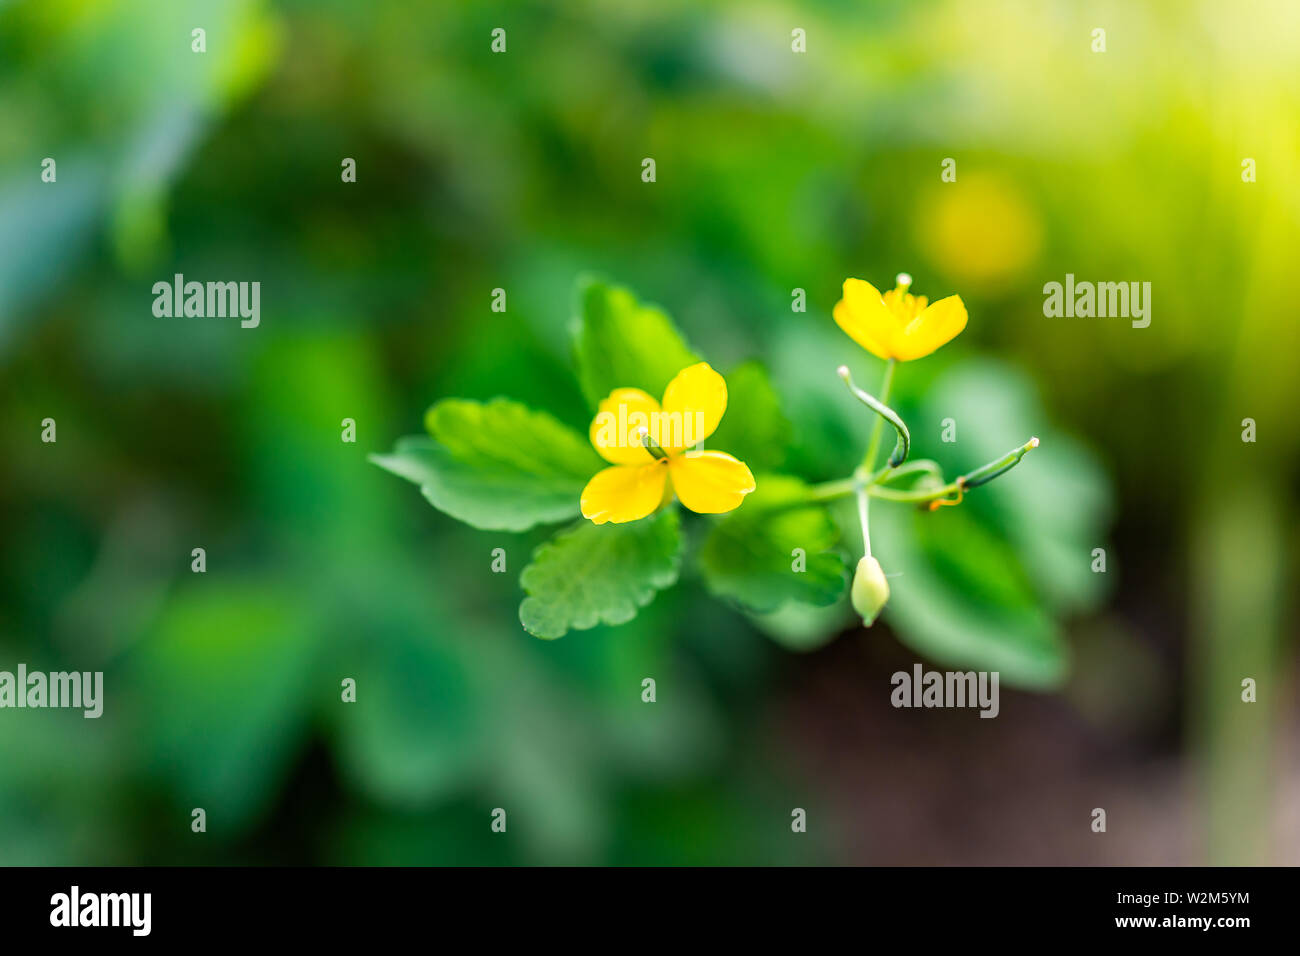 Bokeh background of Greater Celandine or Chelidonium majus yellow flowers macro closeup, an herb used for medicine Stock Photo